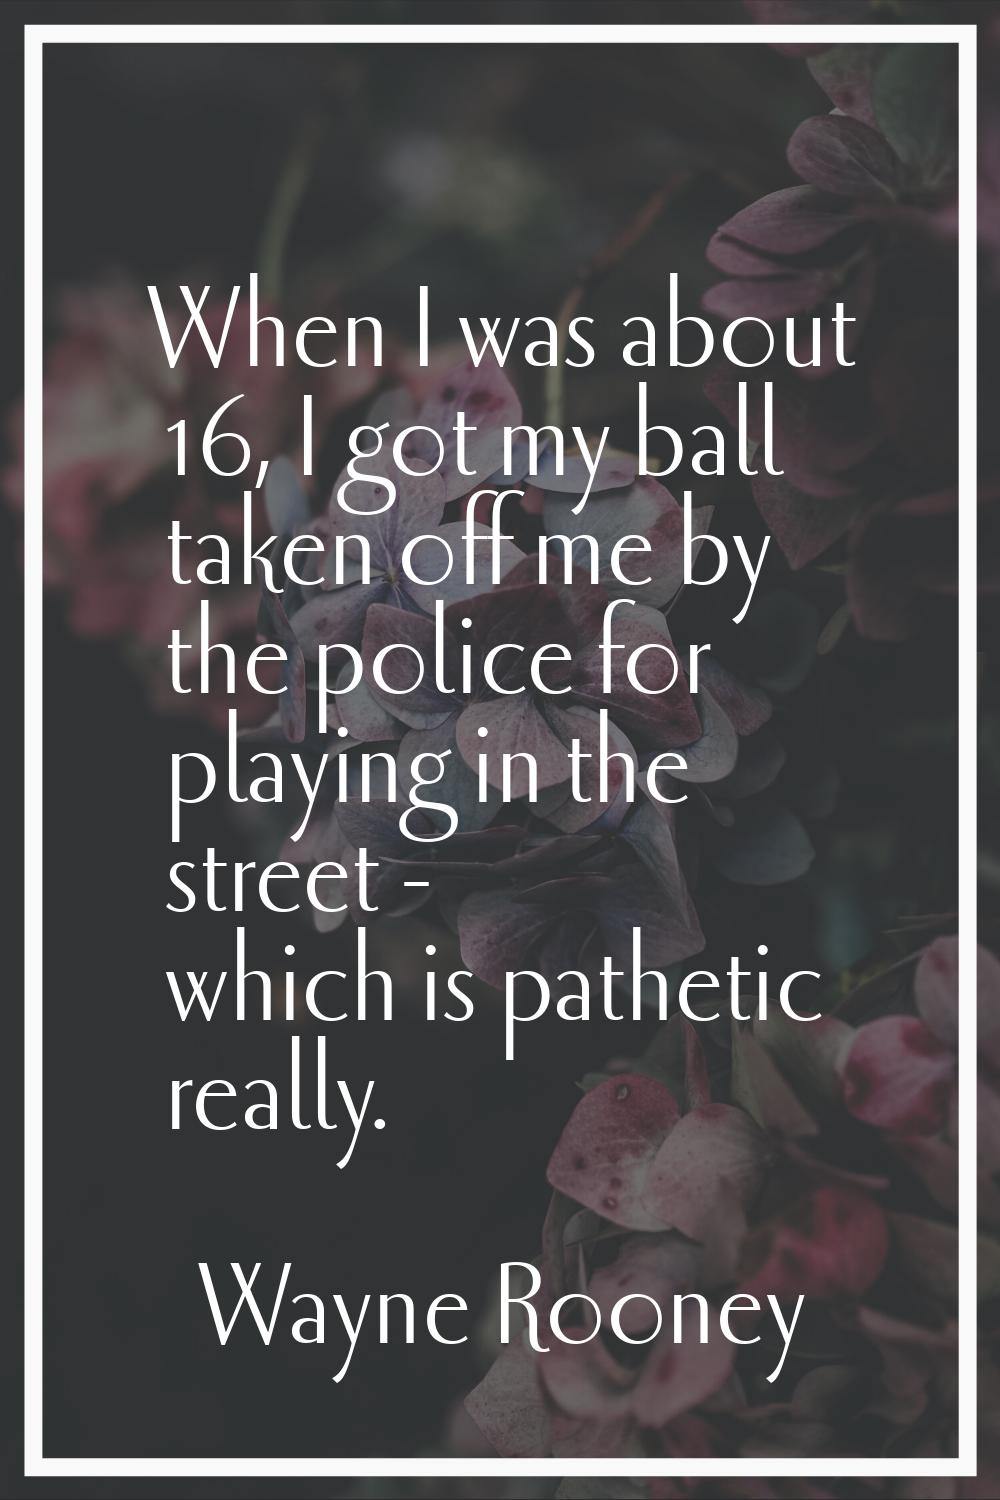 When I was about 16, I got my ball taken off me by the police for playing in the street - which is 